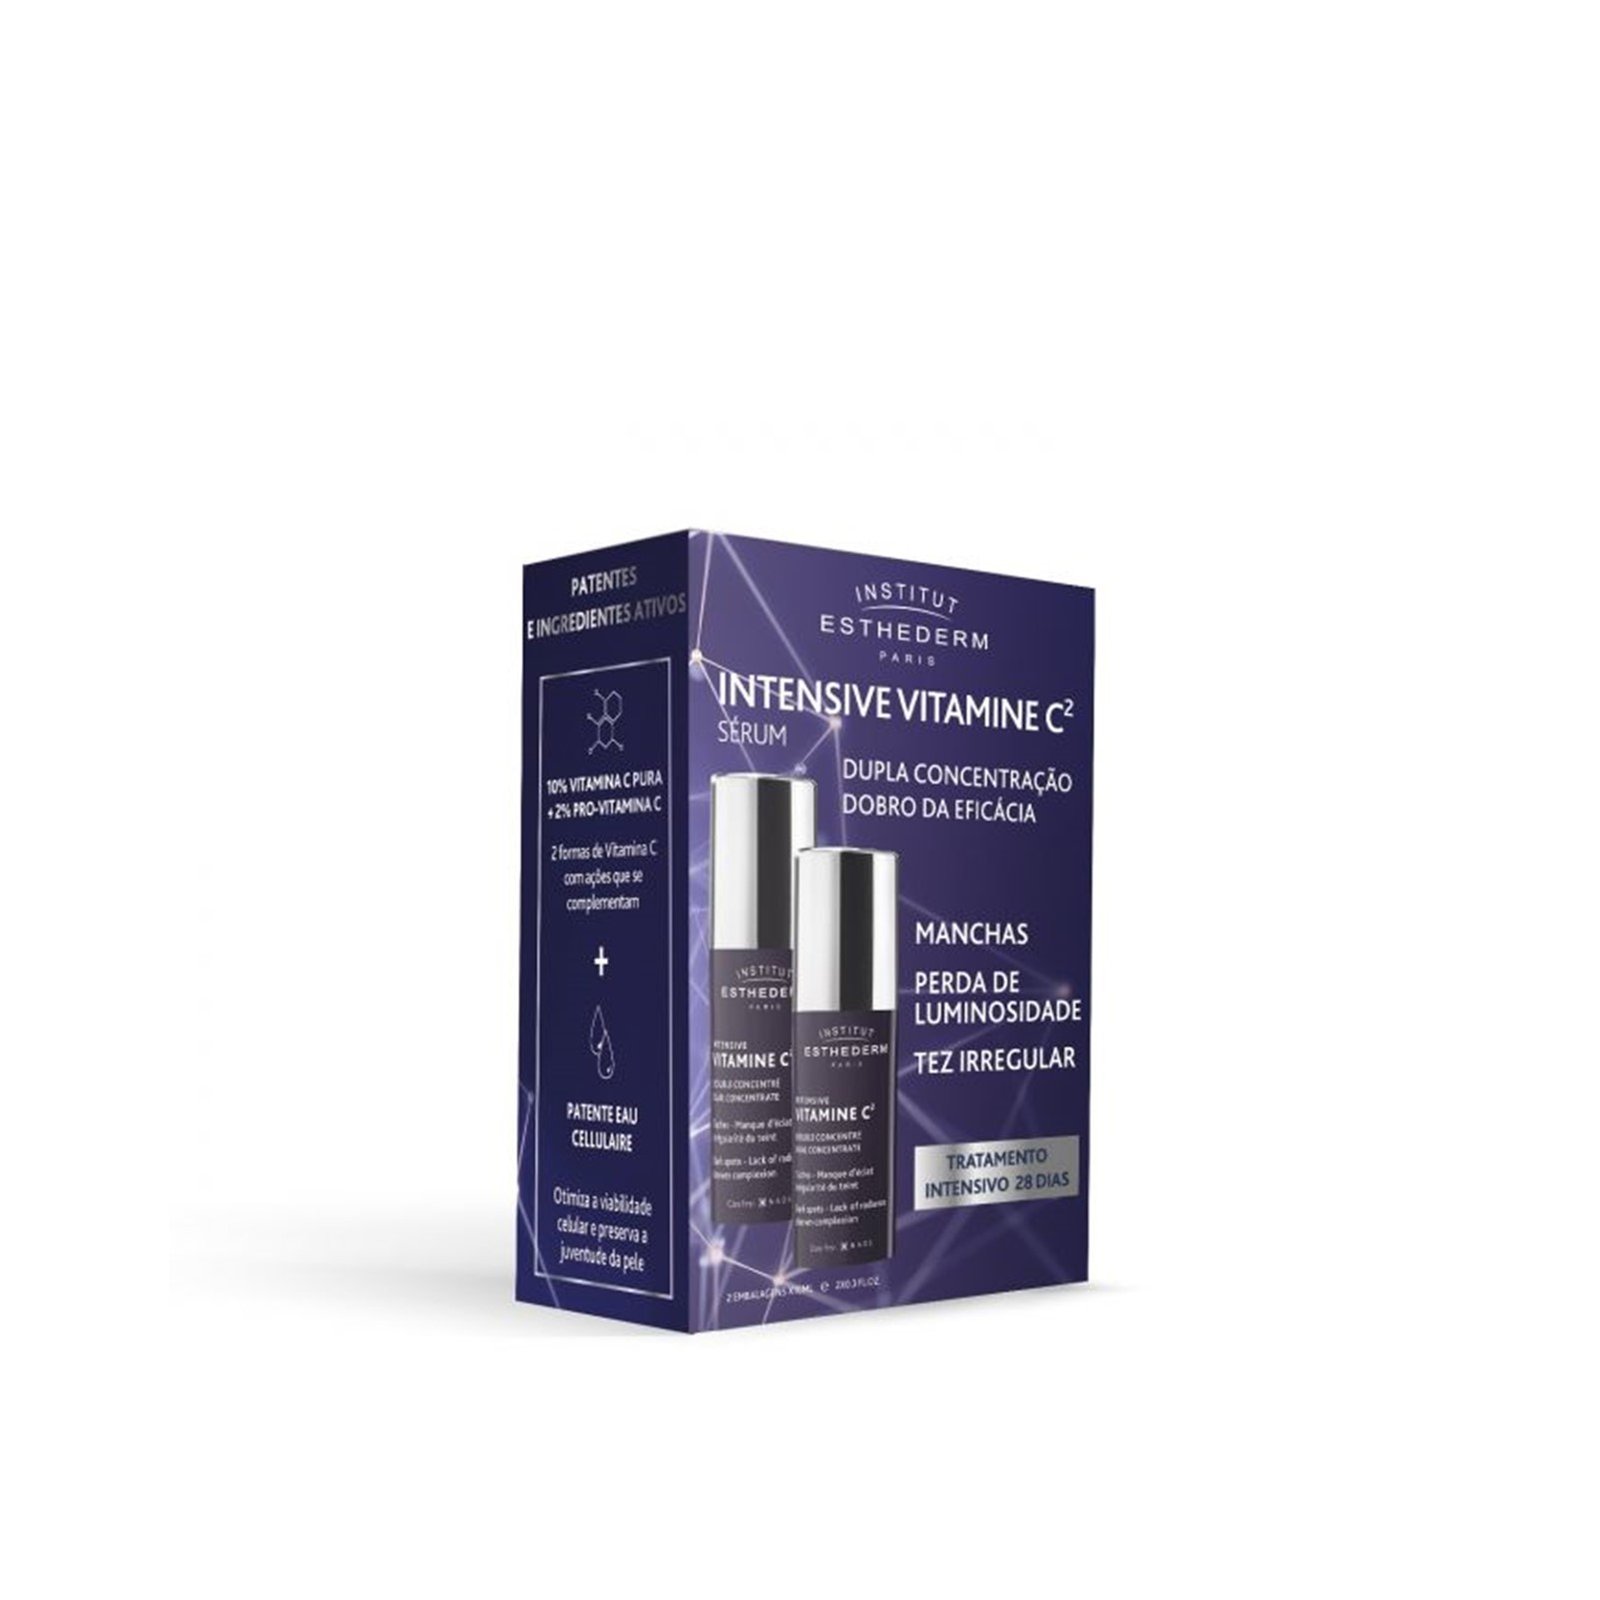 Esthederm Intensive Vitamine C² Dual Concentrate 10ml x2